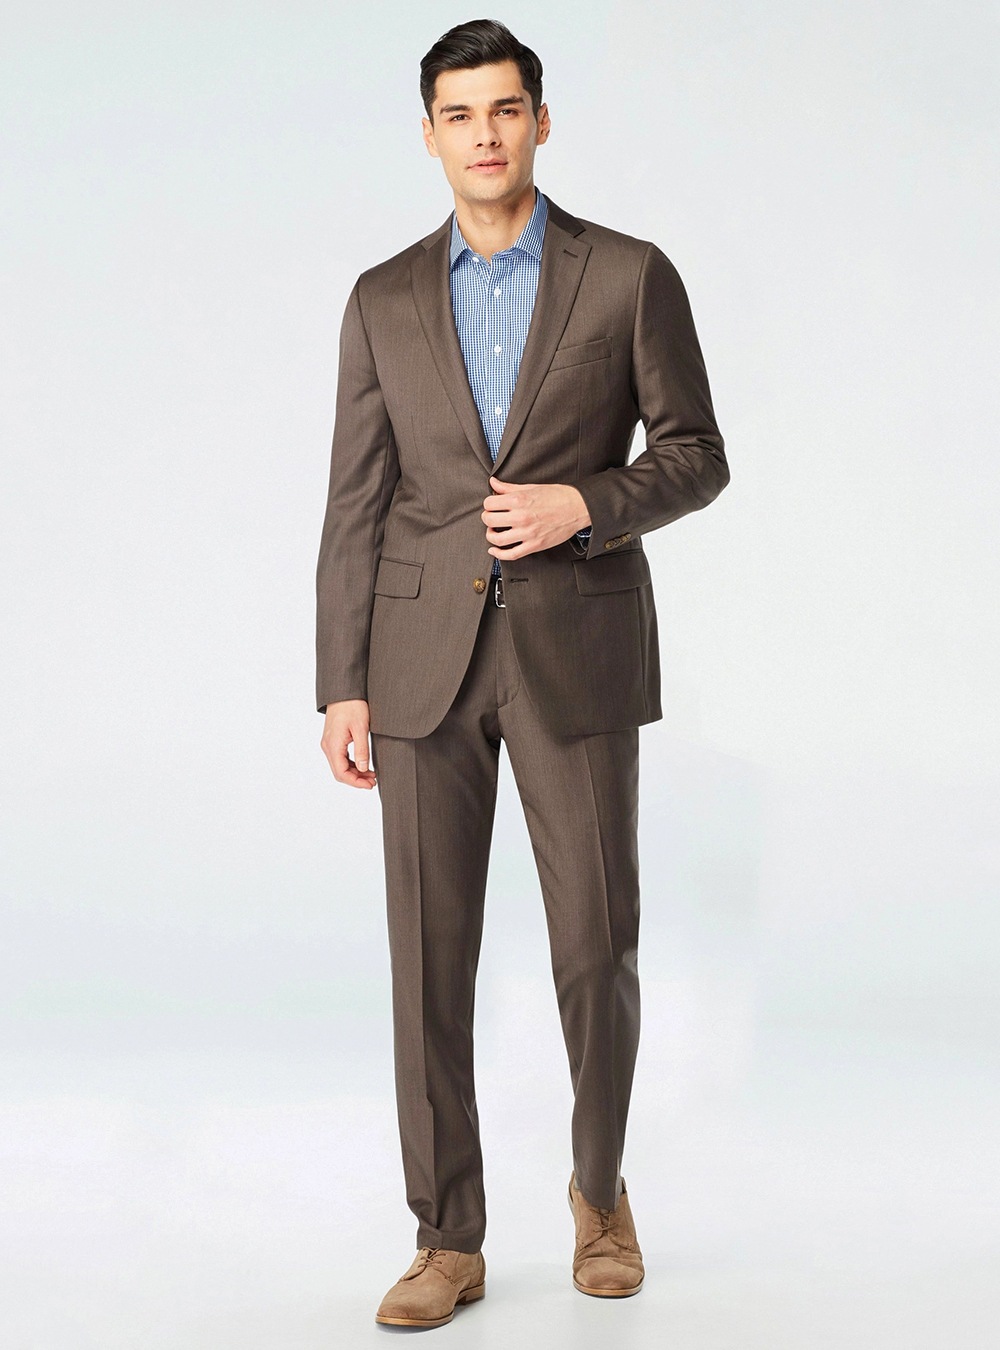 brown suit, blue striped shirt and tan derby shoes